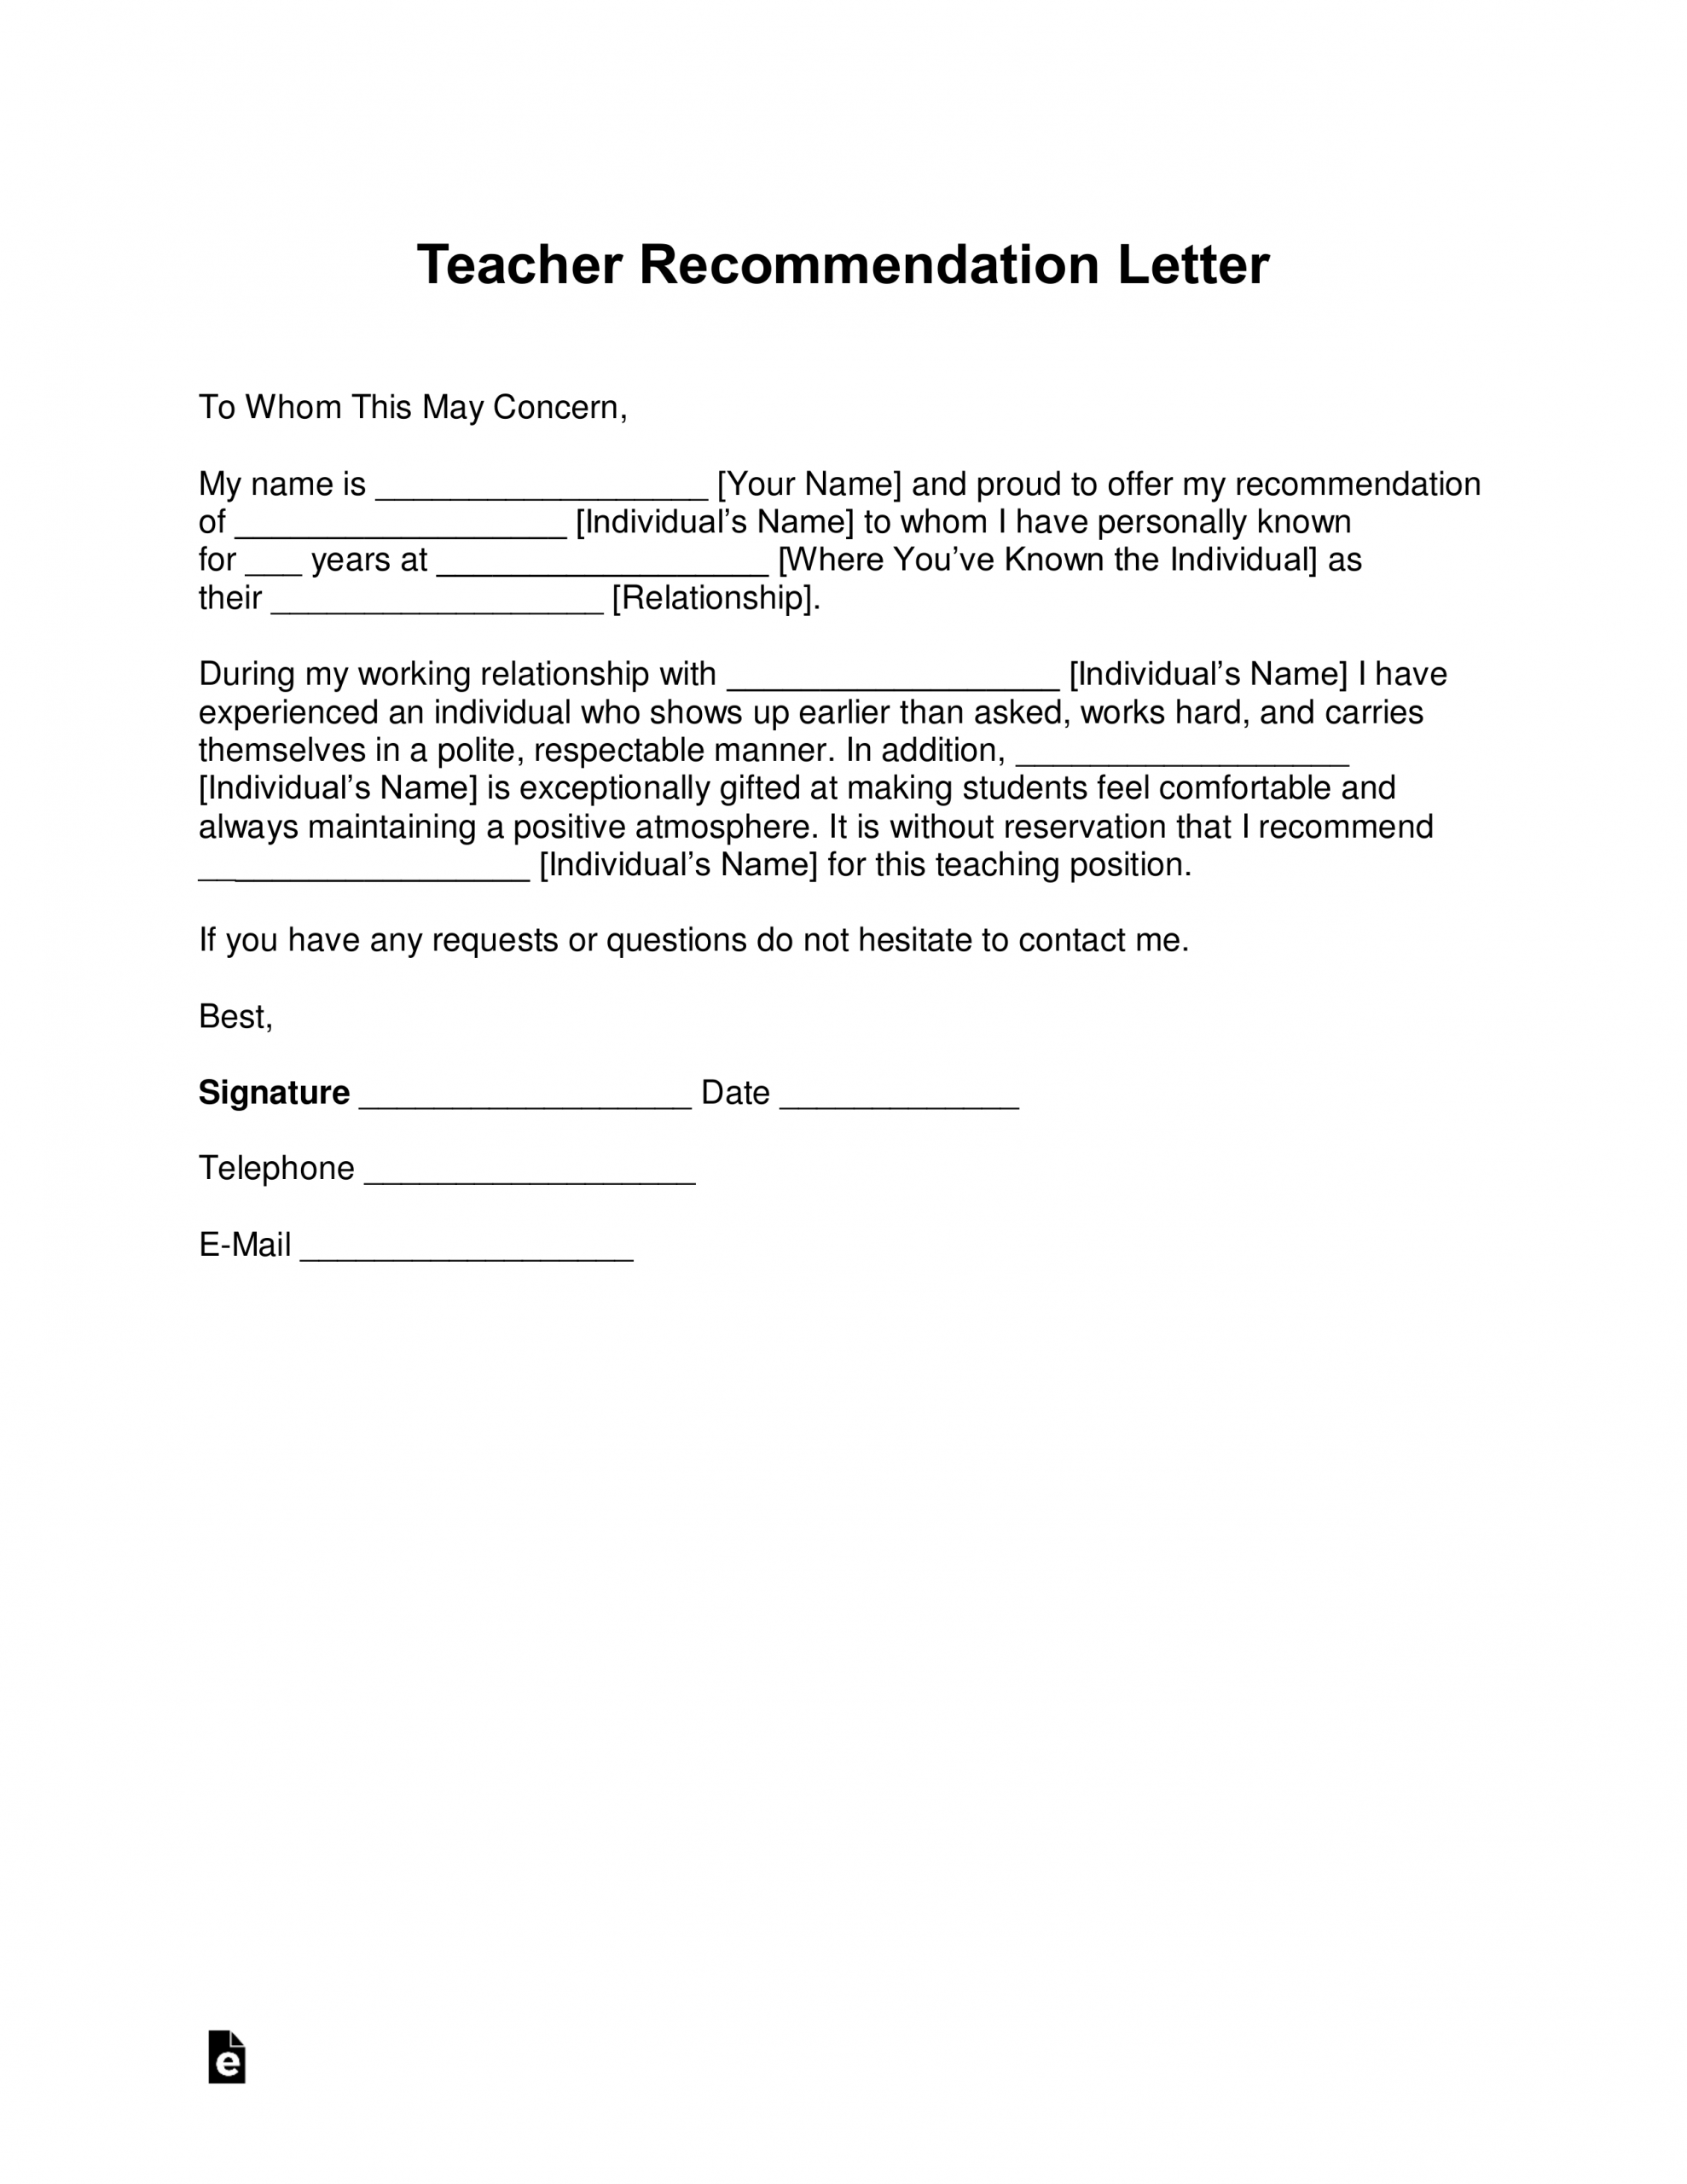 Free Teacher Recommendation Letter Template With Samples throughout size 2550 X 3301